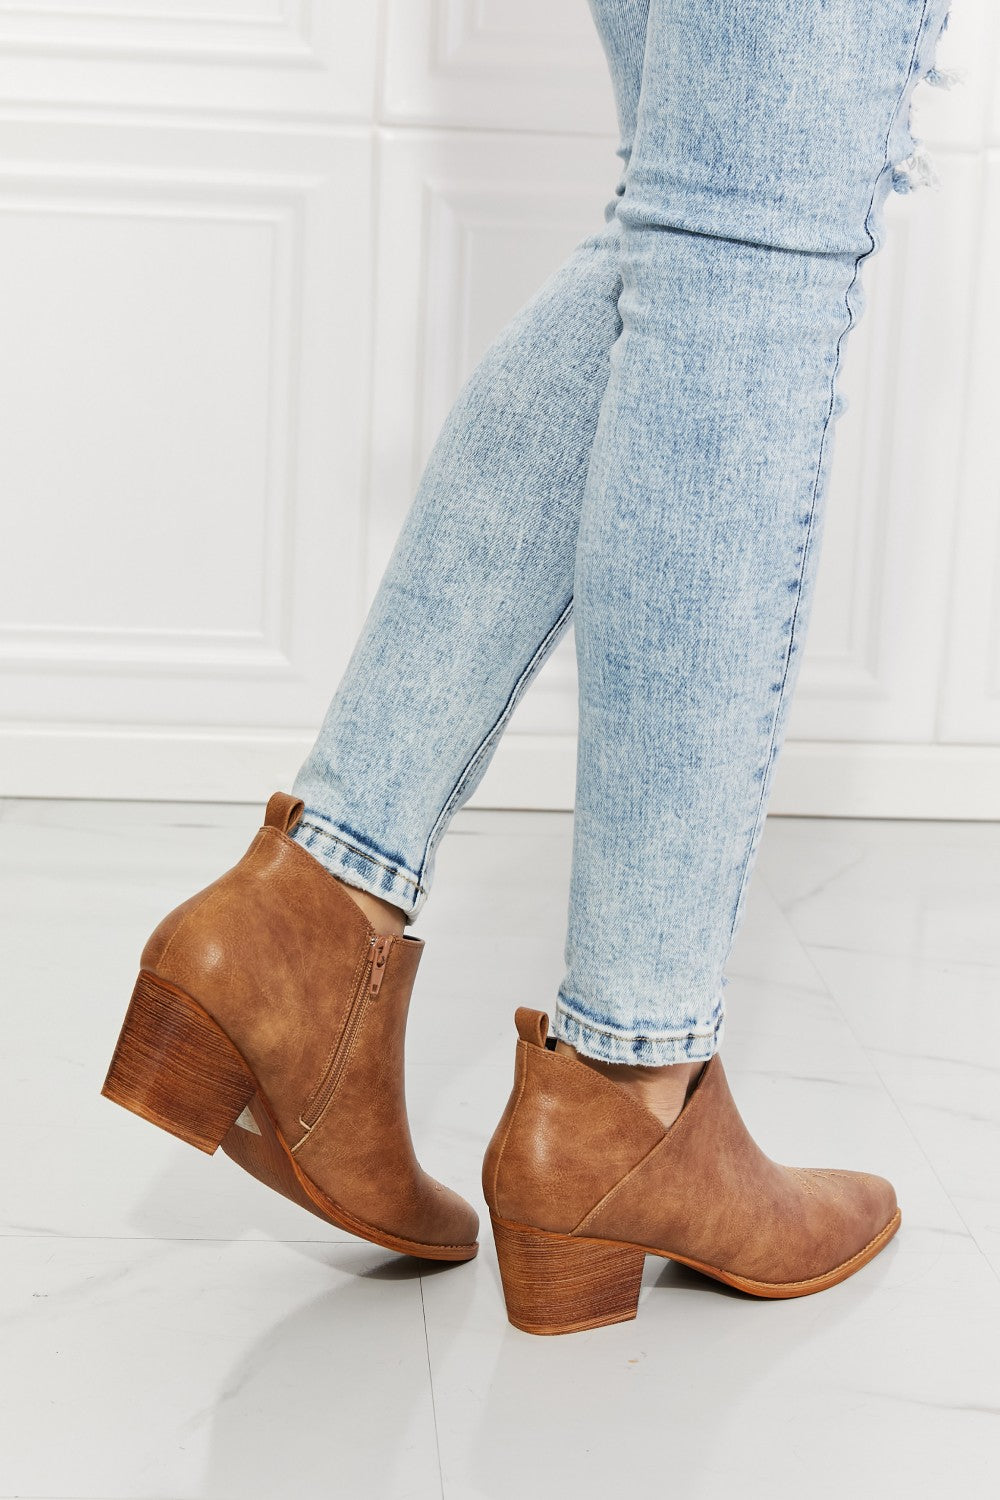 Leather Crossover Cowboy Booties